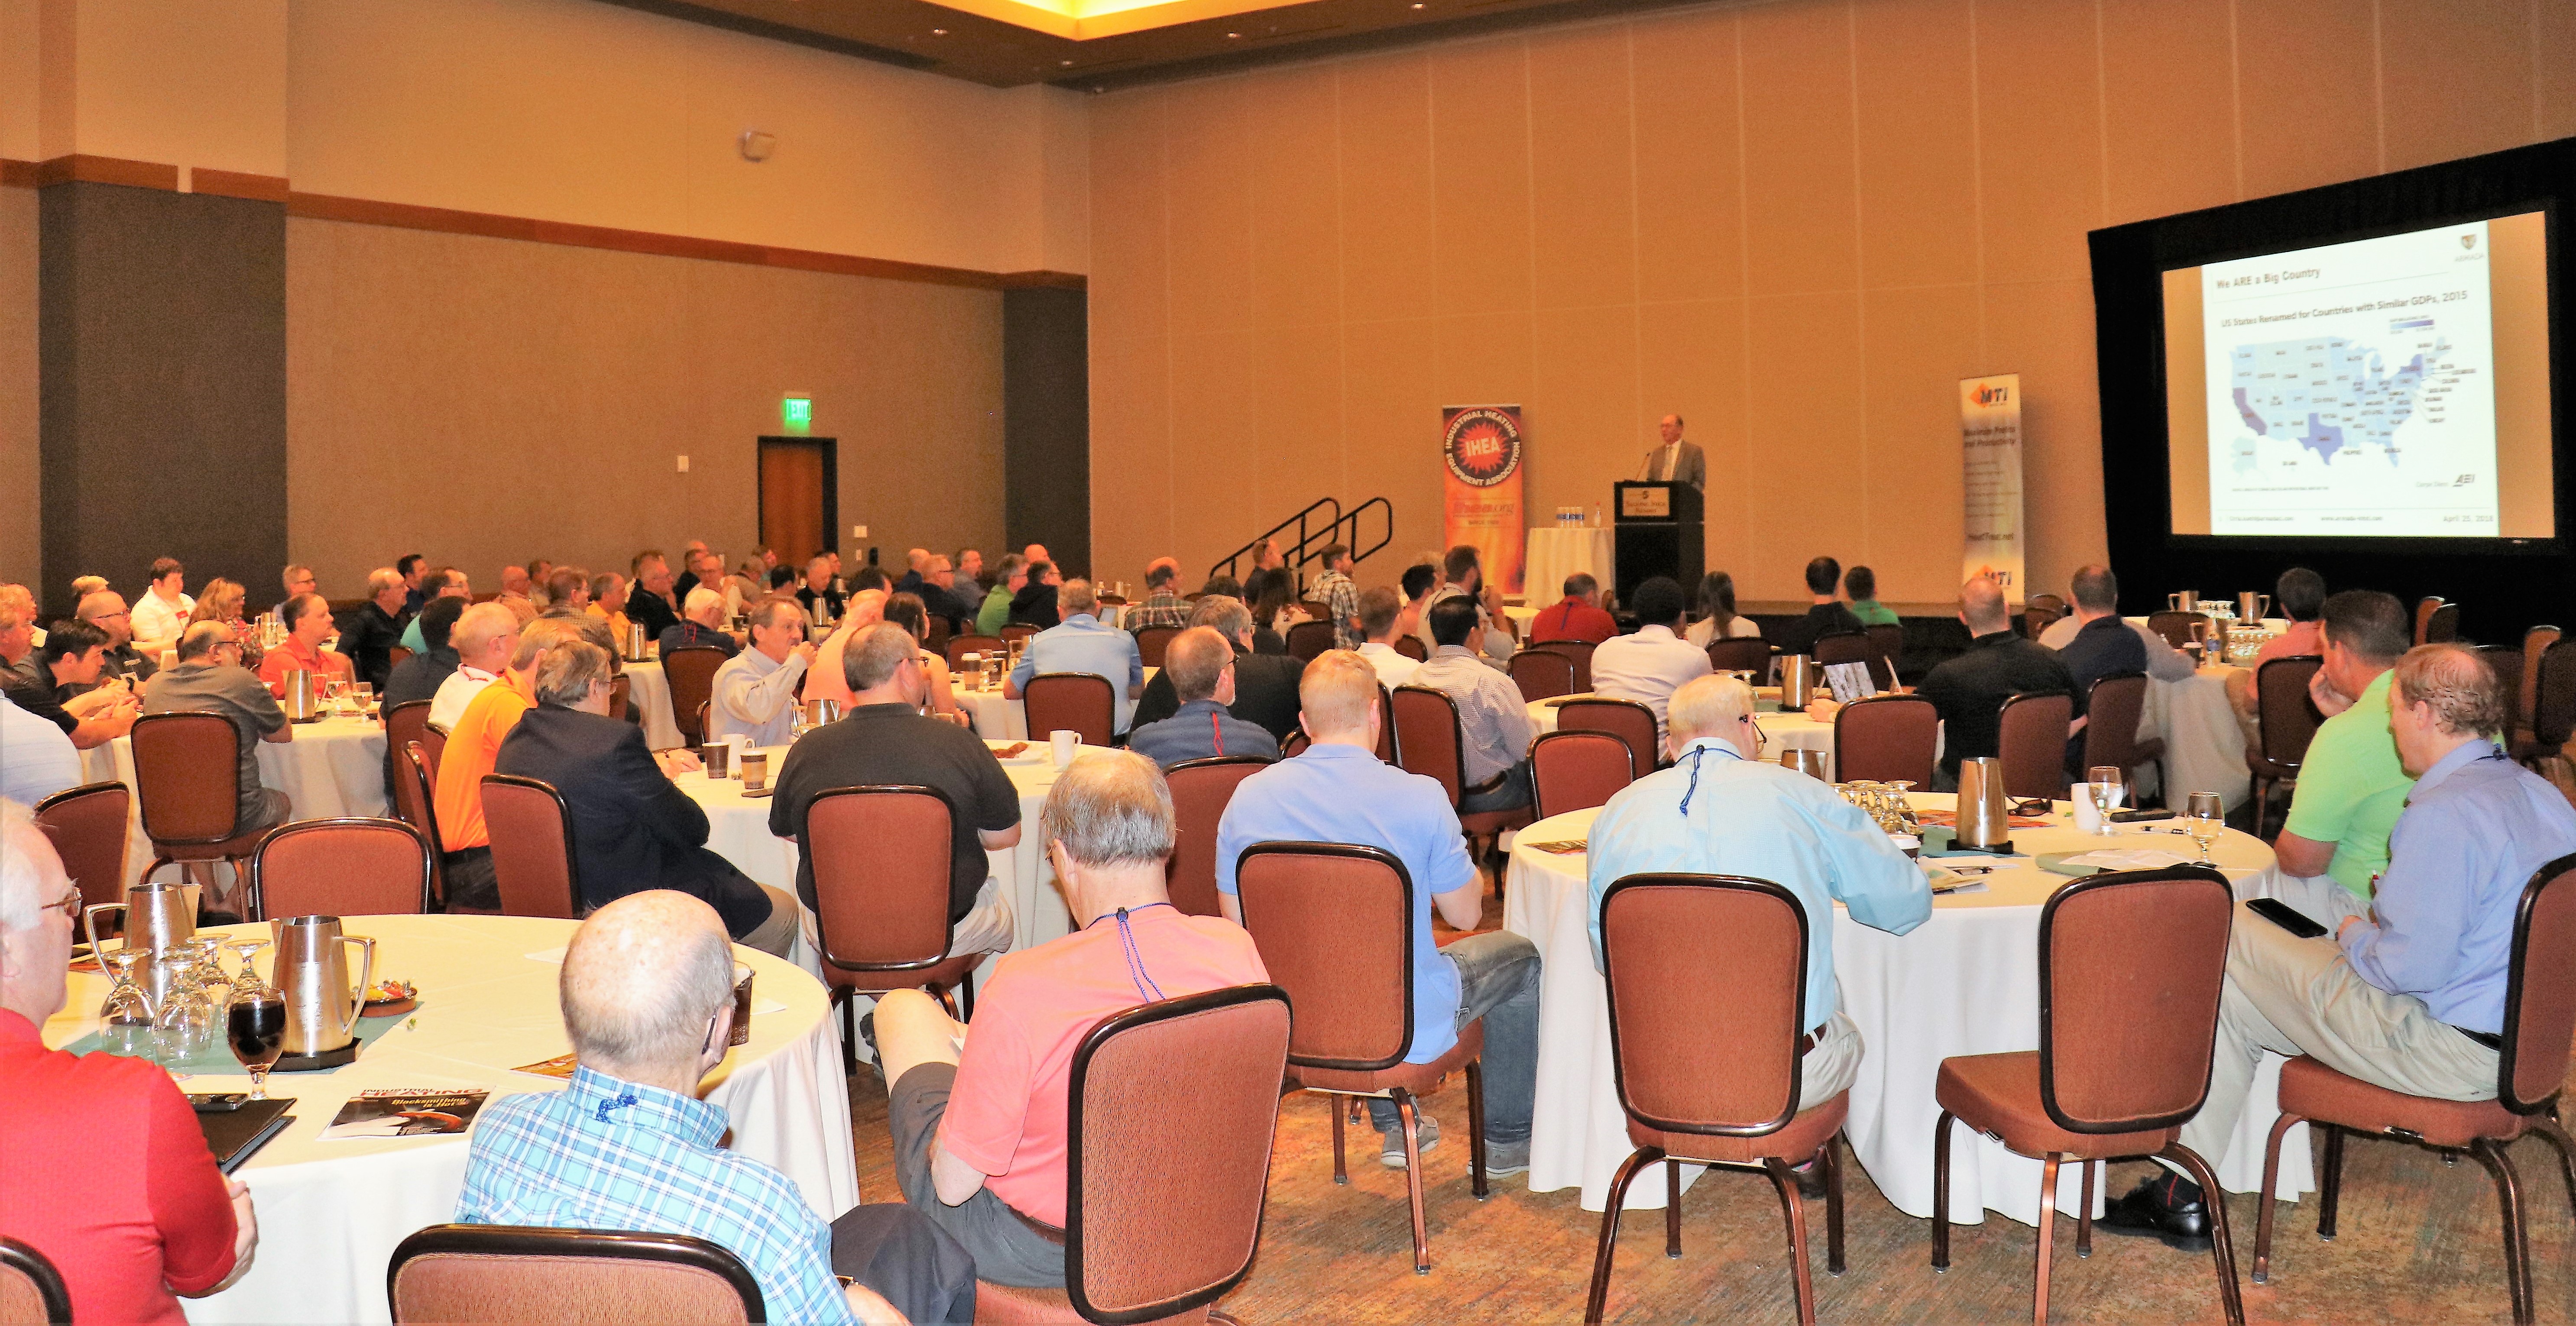 The Industrial Heating Equipment Association (IHEA) plans to celebrate its 90th anniversary at the 2019 Annual Meeting.